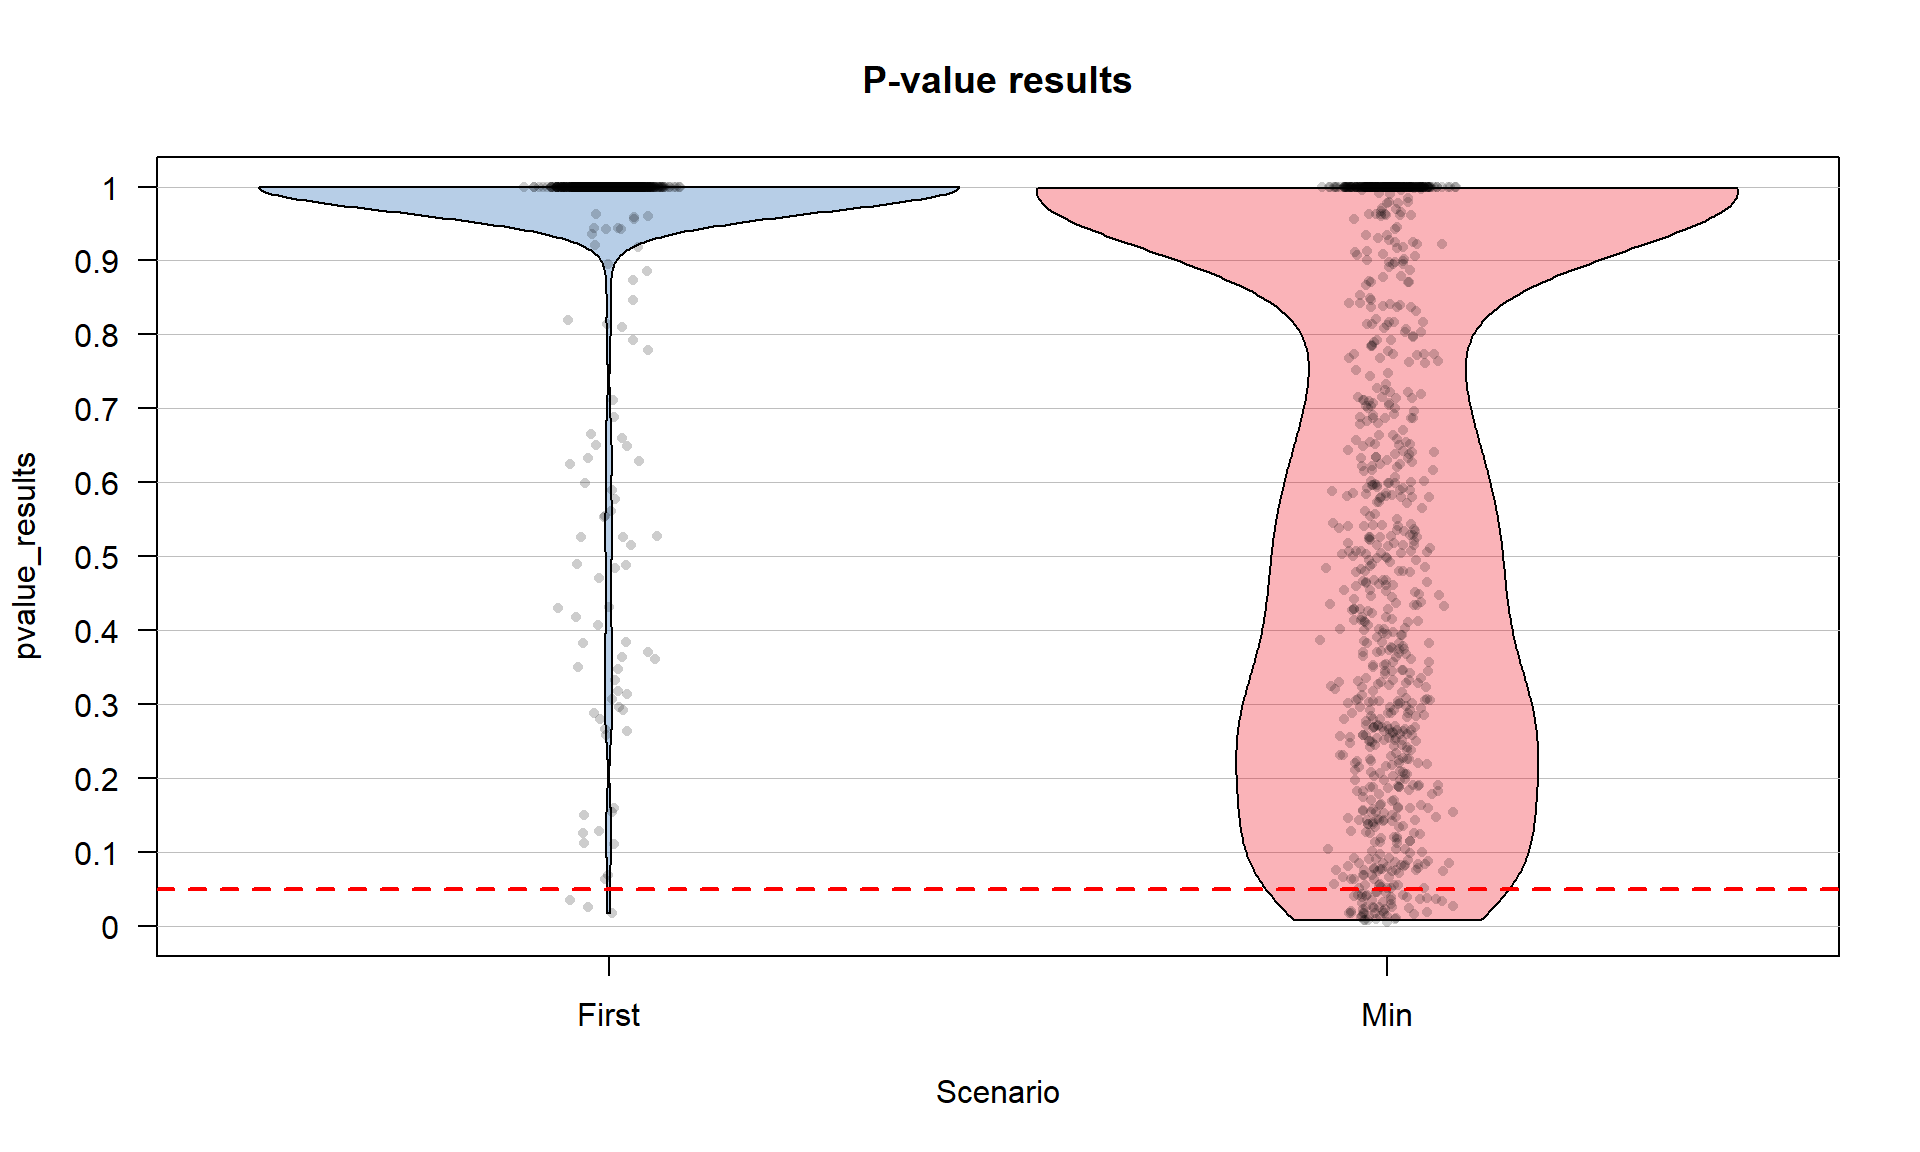 Pirate-plot of a simulation study results of p-values with Bonferroni correction.